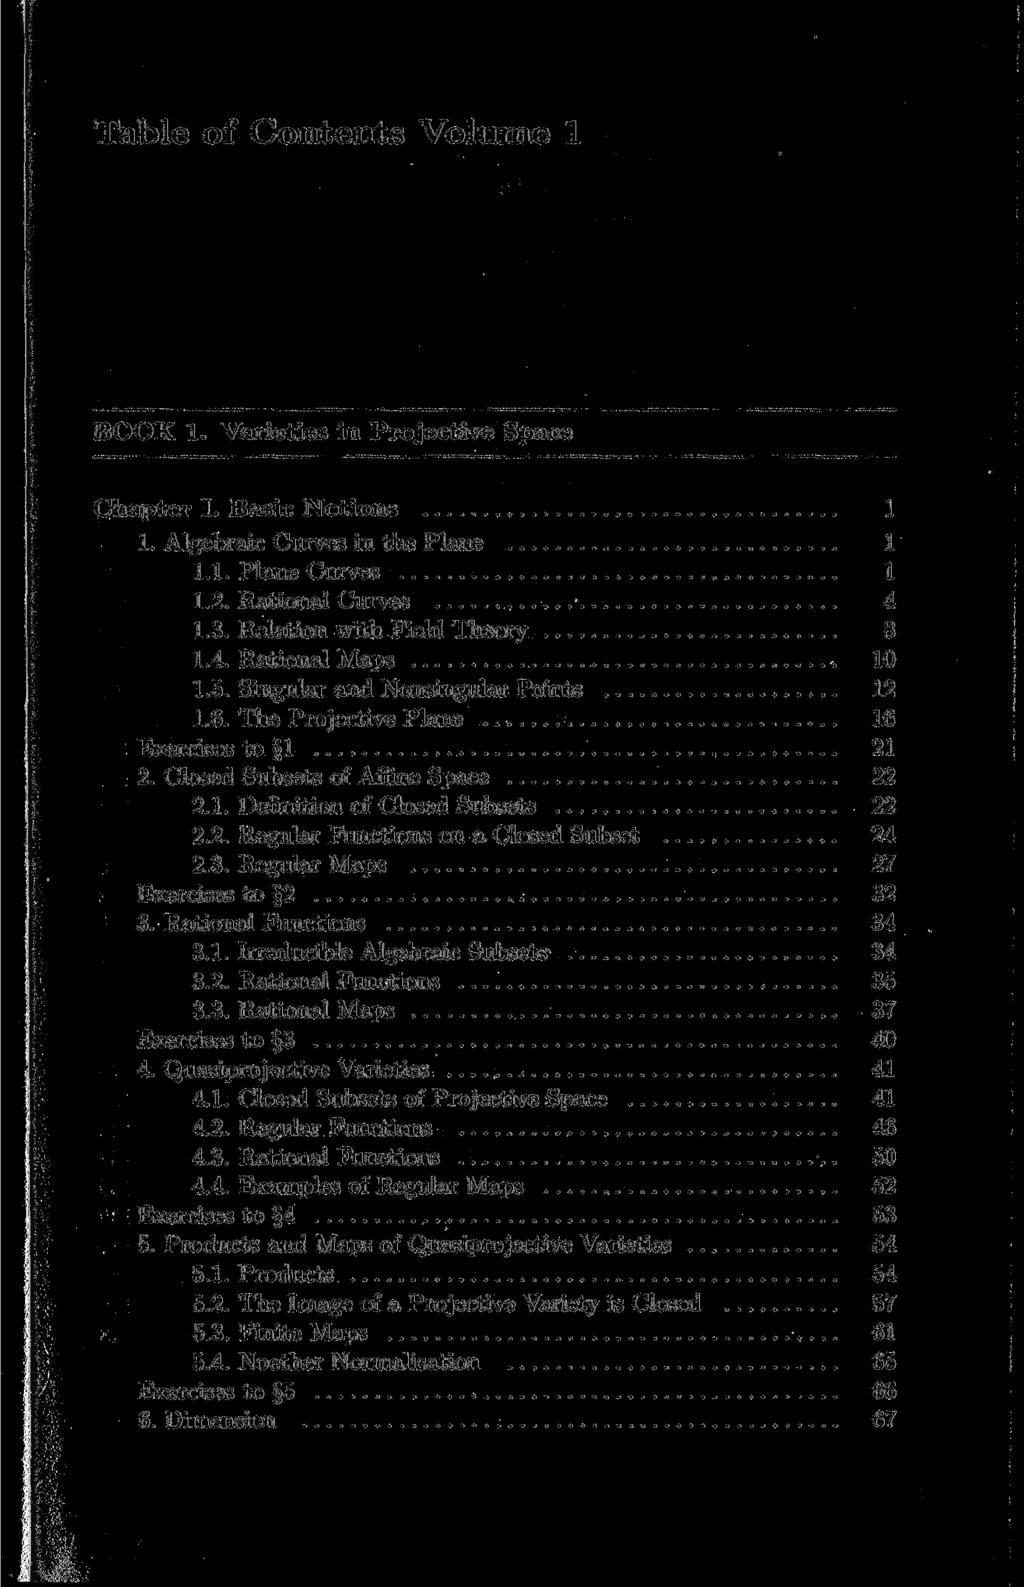 Table of Contents Volume 1 BOOK 1. Varieties in Projective Space Chapter I. Basic Notions 1 1. Algebraic Curves in the Plane 1 1.1. Plane Curves 1 1.2. Rational Curves 4 1.3.